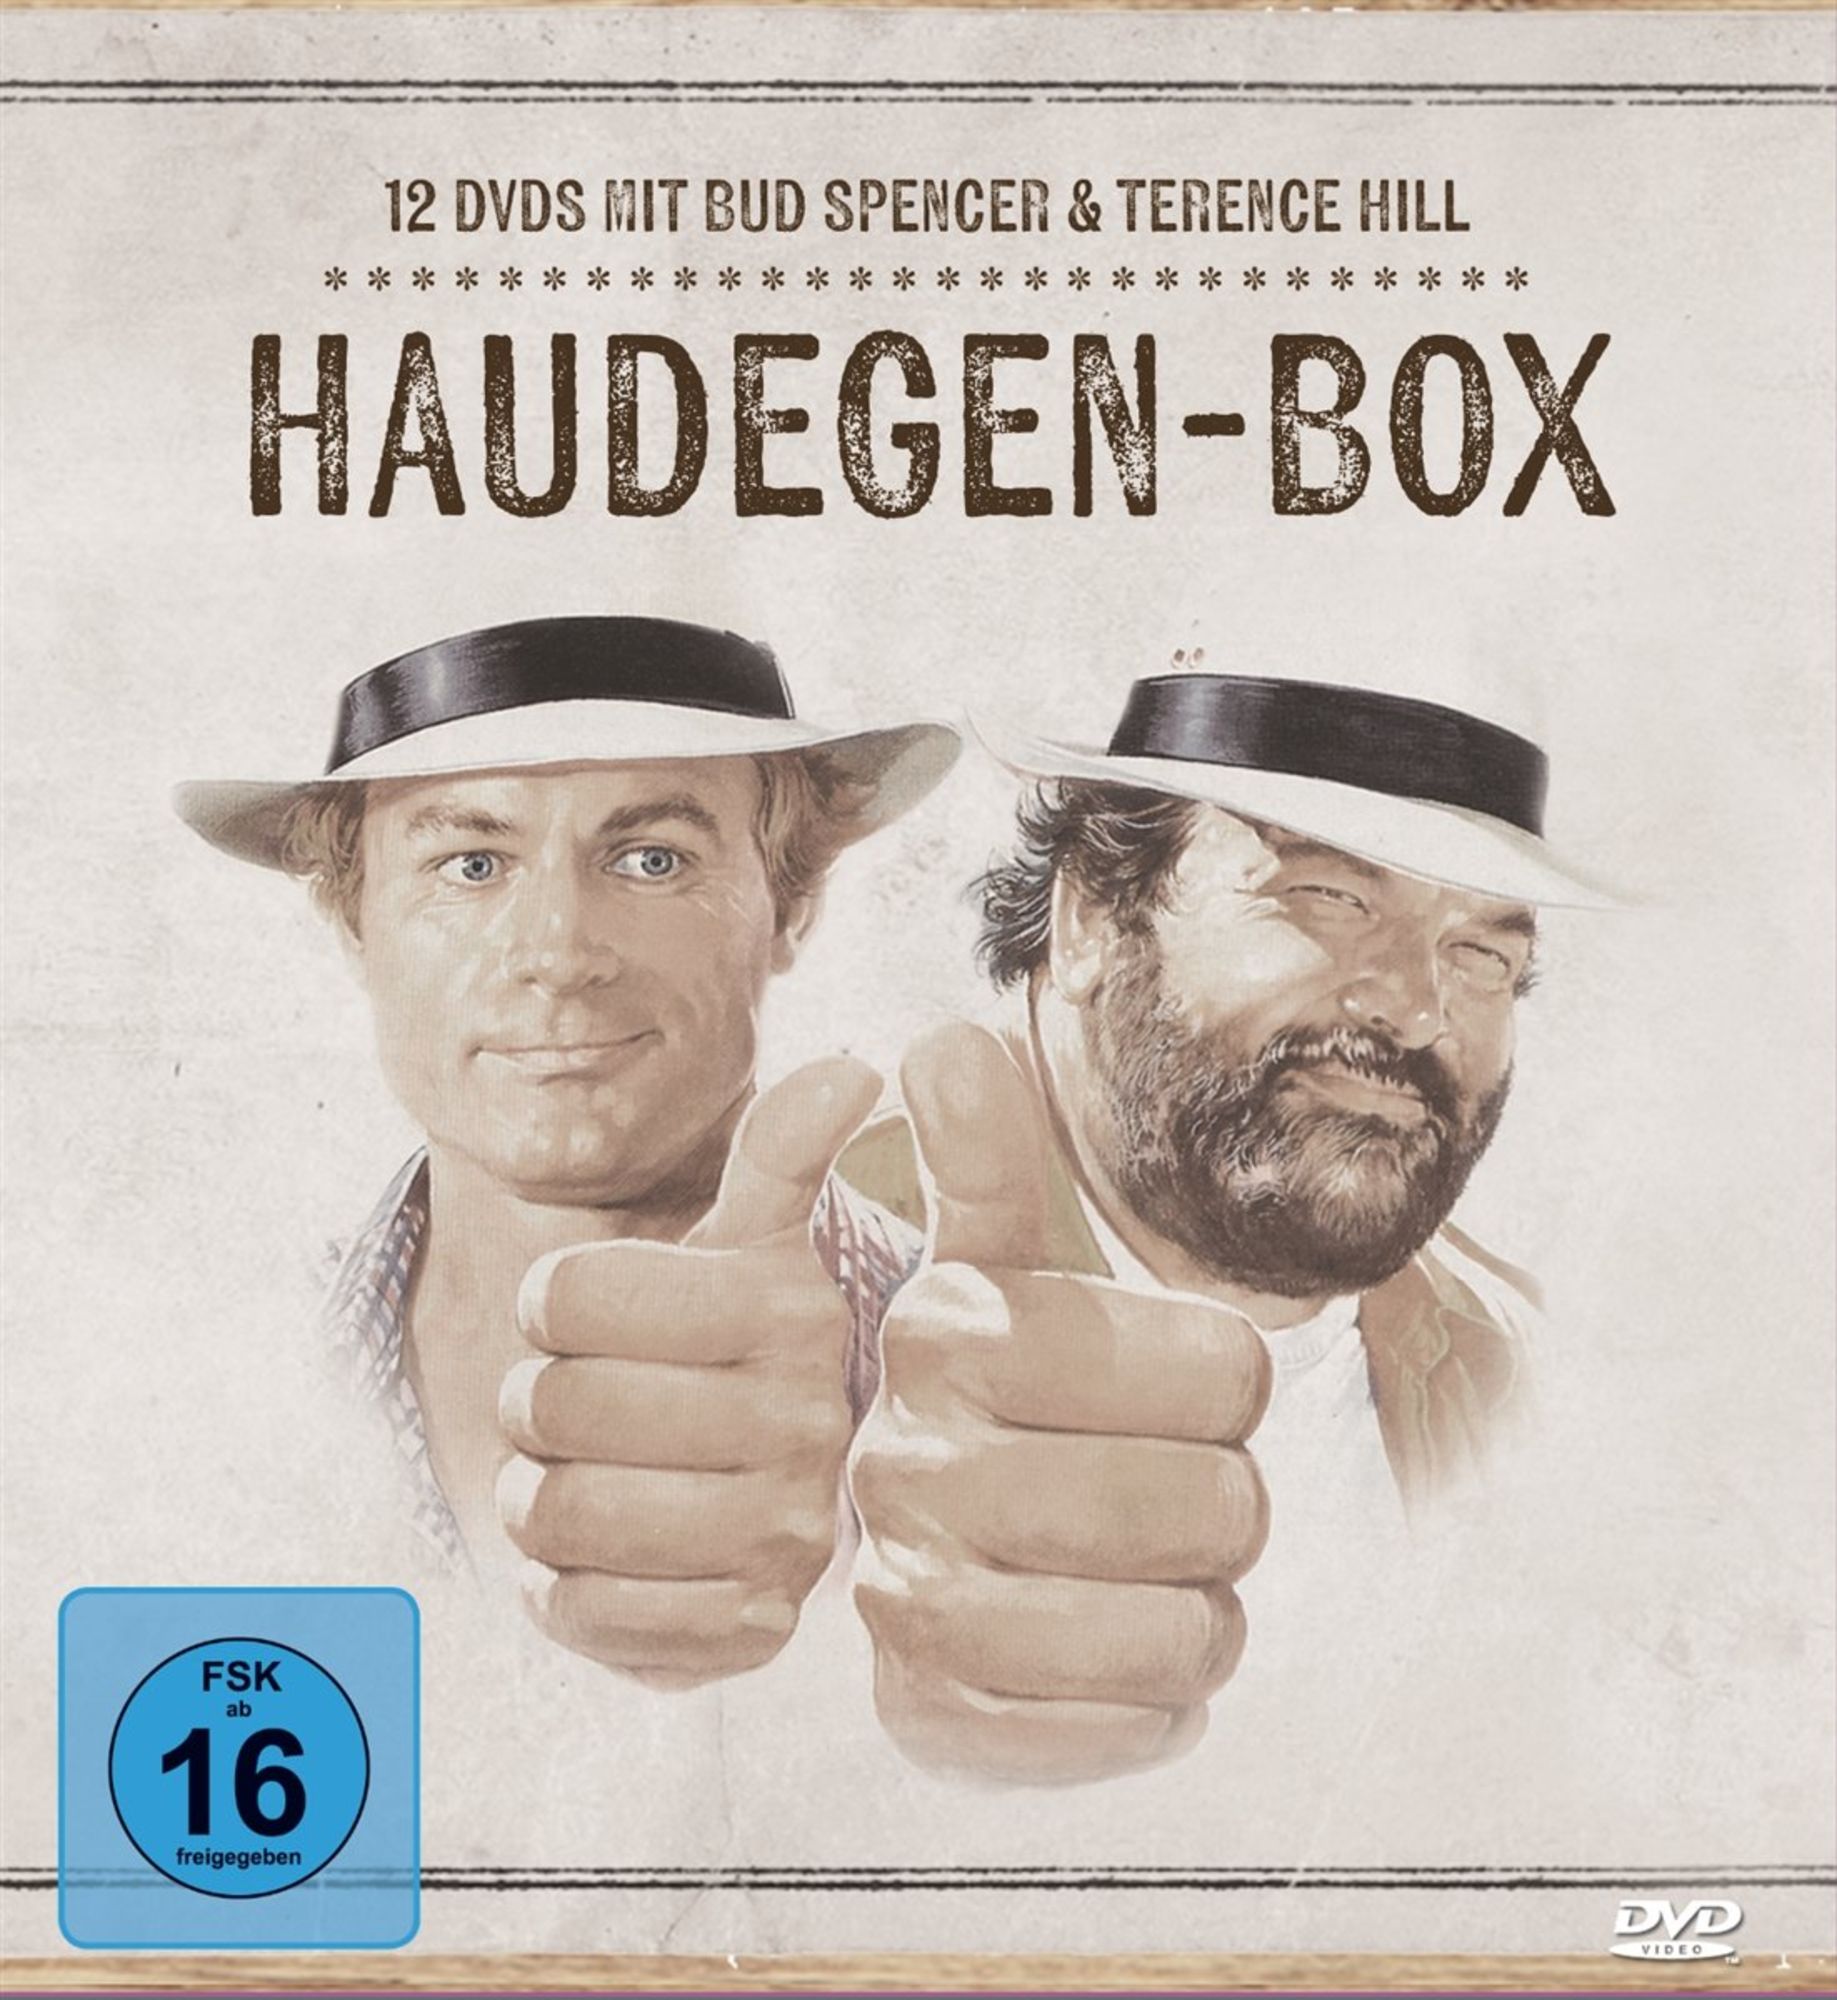 Bud Spencer & Terence Hill - 12 DVD Box [12 DVDs]' von 'Sergio